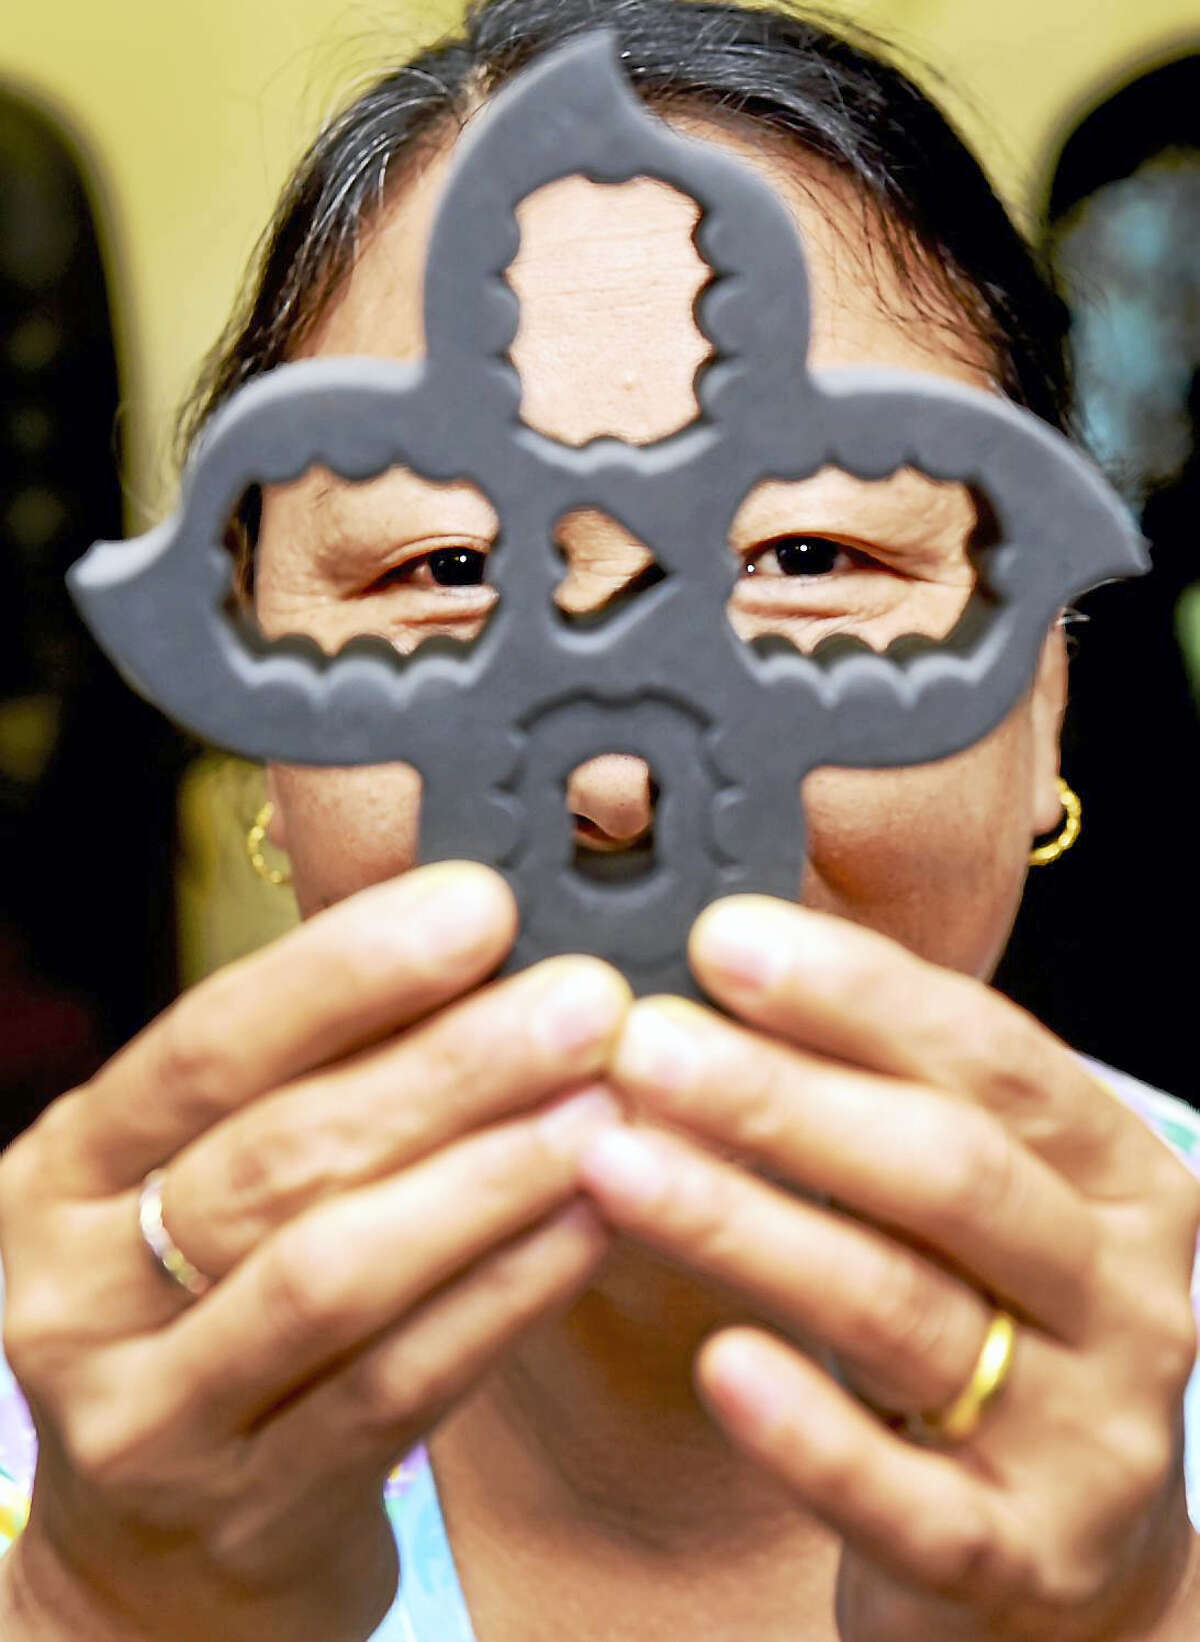 (Peter Hvizdak - New Haven Register) Kunga Choekyi, owner of K.C.’s Nails L.L.C. of Old Saybrook, a manicure and pedicure nail salon, with her patented invention, a nail polish holder called the Polish Posy, in the design of a lotus flower. The Polish Posy enables anyone to safely hold, tilt, and transport the bottles. Cyoekyi is a Tibetan and a follower of the Dalai Lama. A portion of the proceeds of the Polish Posy will go to organizations that care for Tibetan refugee children in southern India and to local charities.